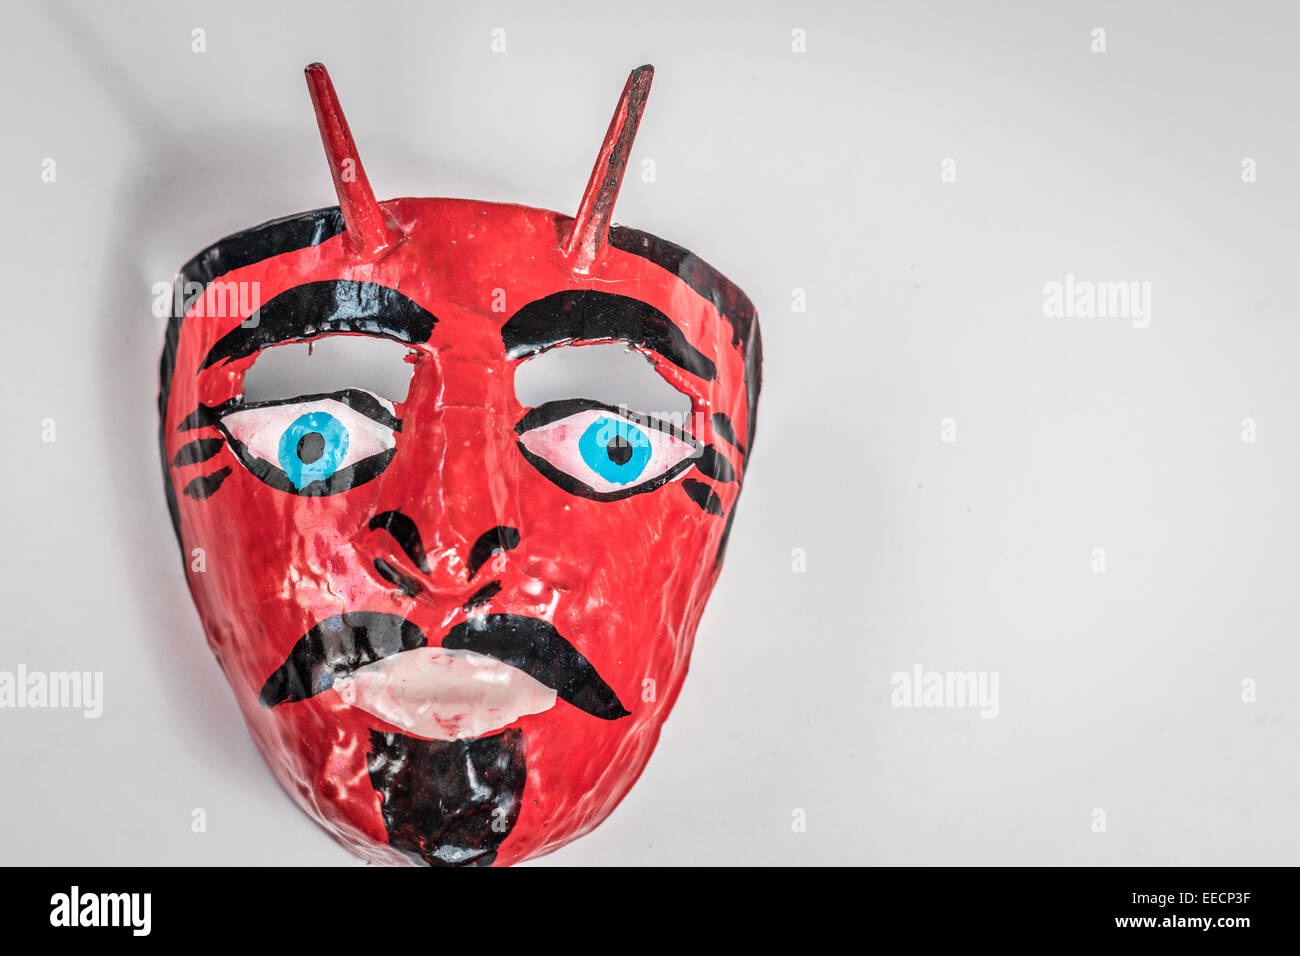 Red devil mache paper mask from the mexican tradition Stock Photo